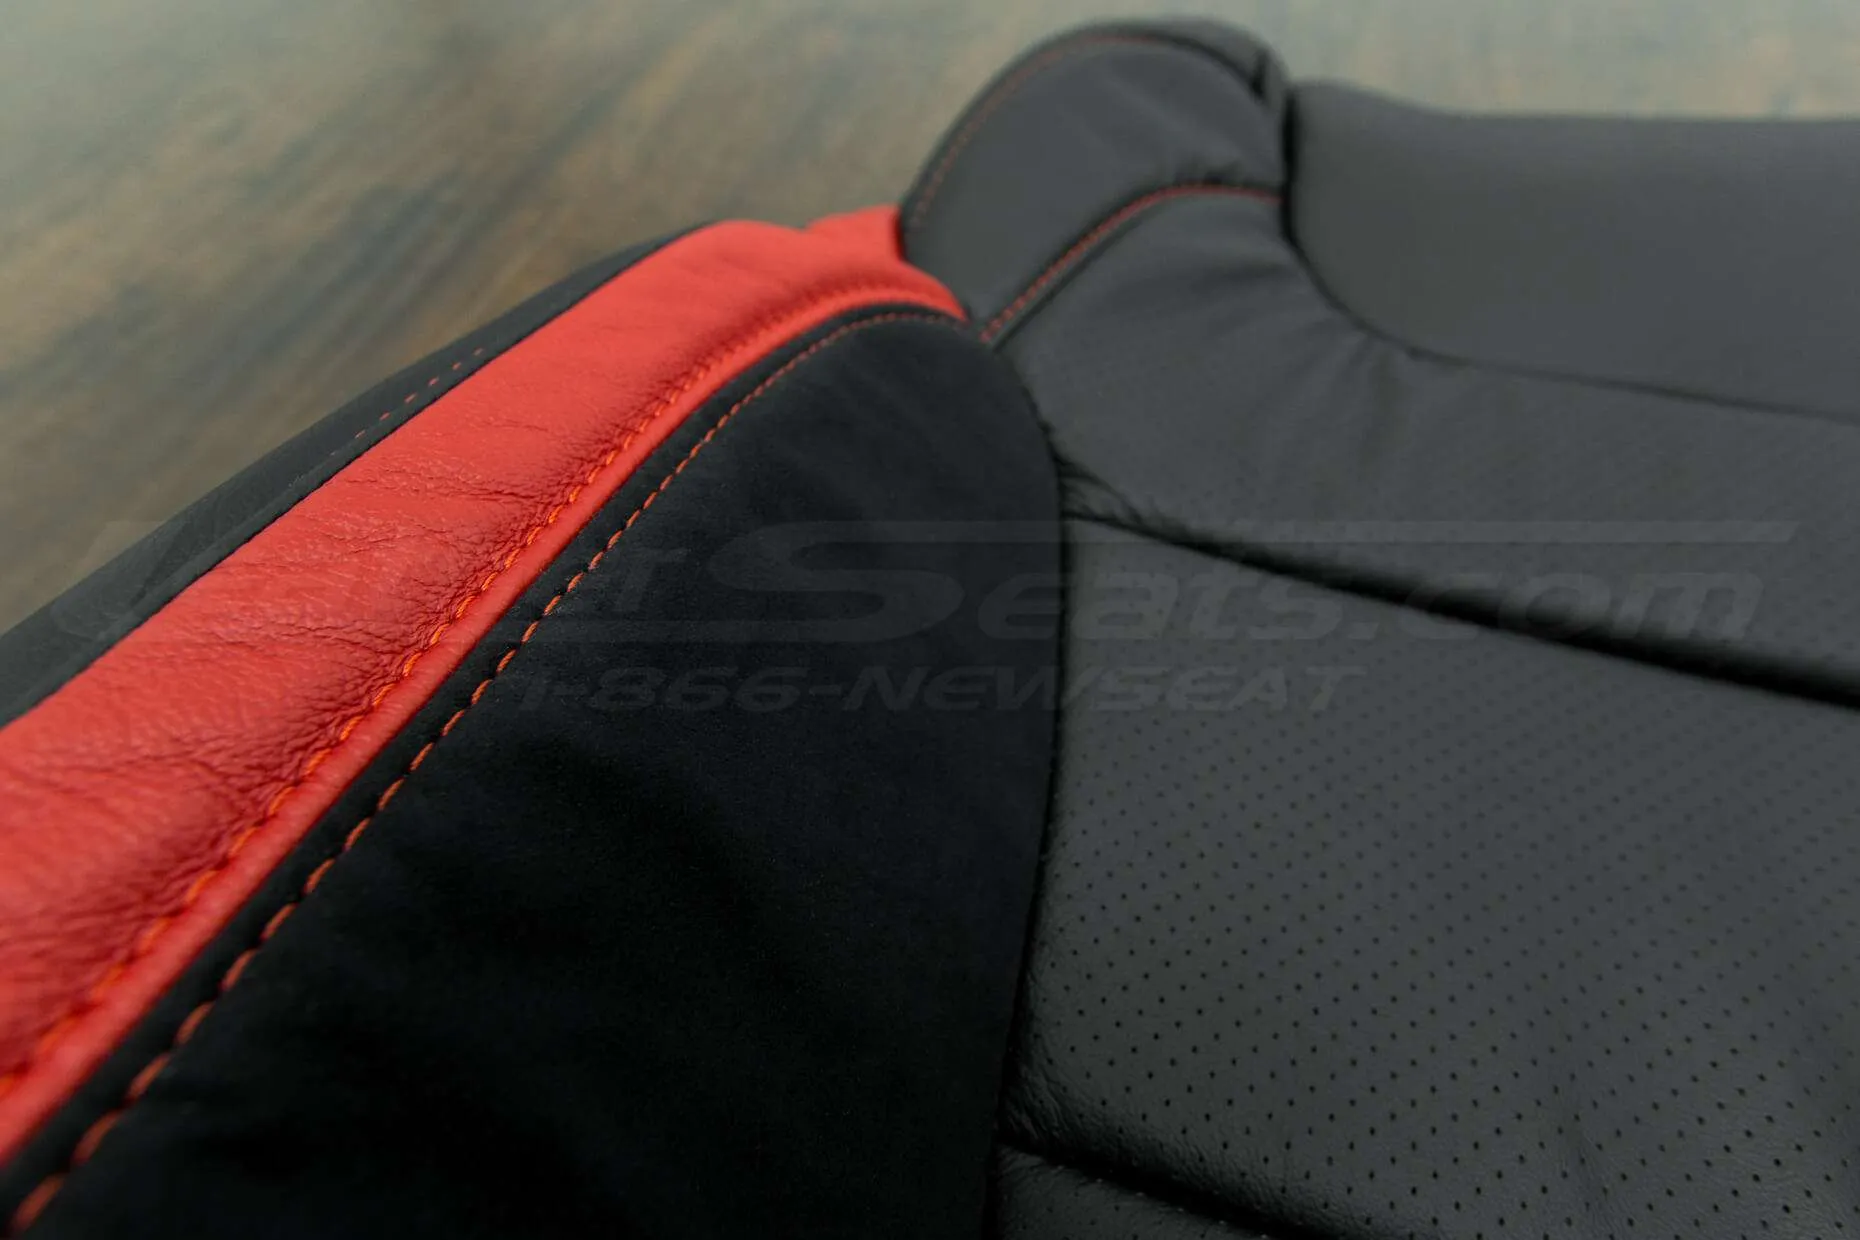 Ford Raptor Leather Upholstery Kit- Black & Bright Red - Suede wings and double stitching